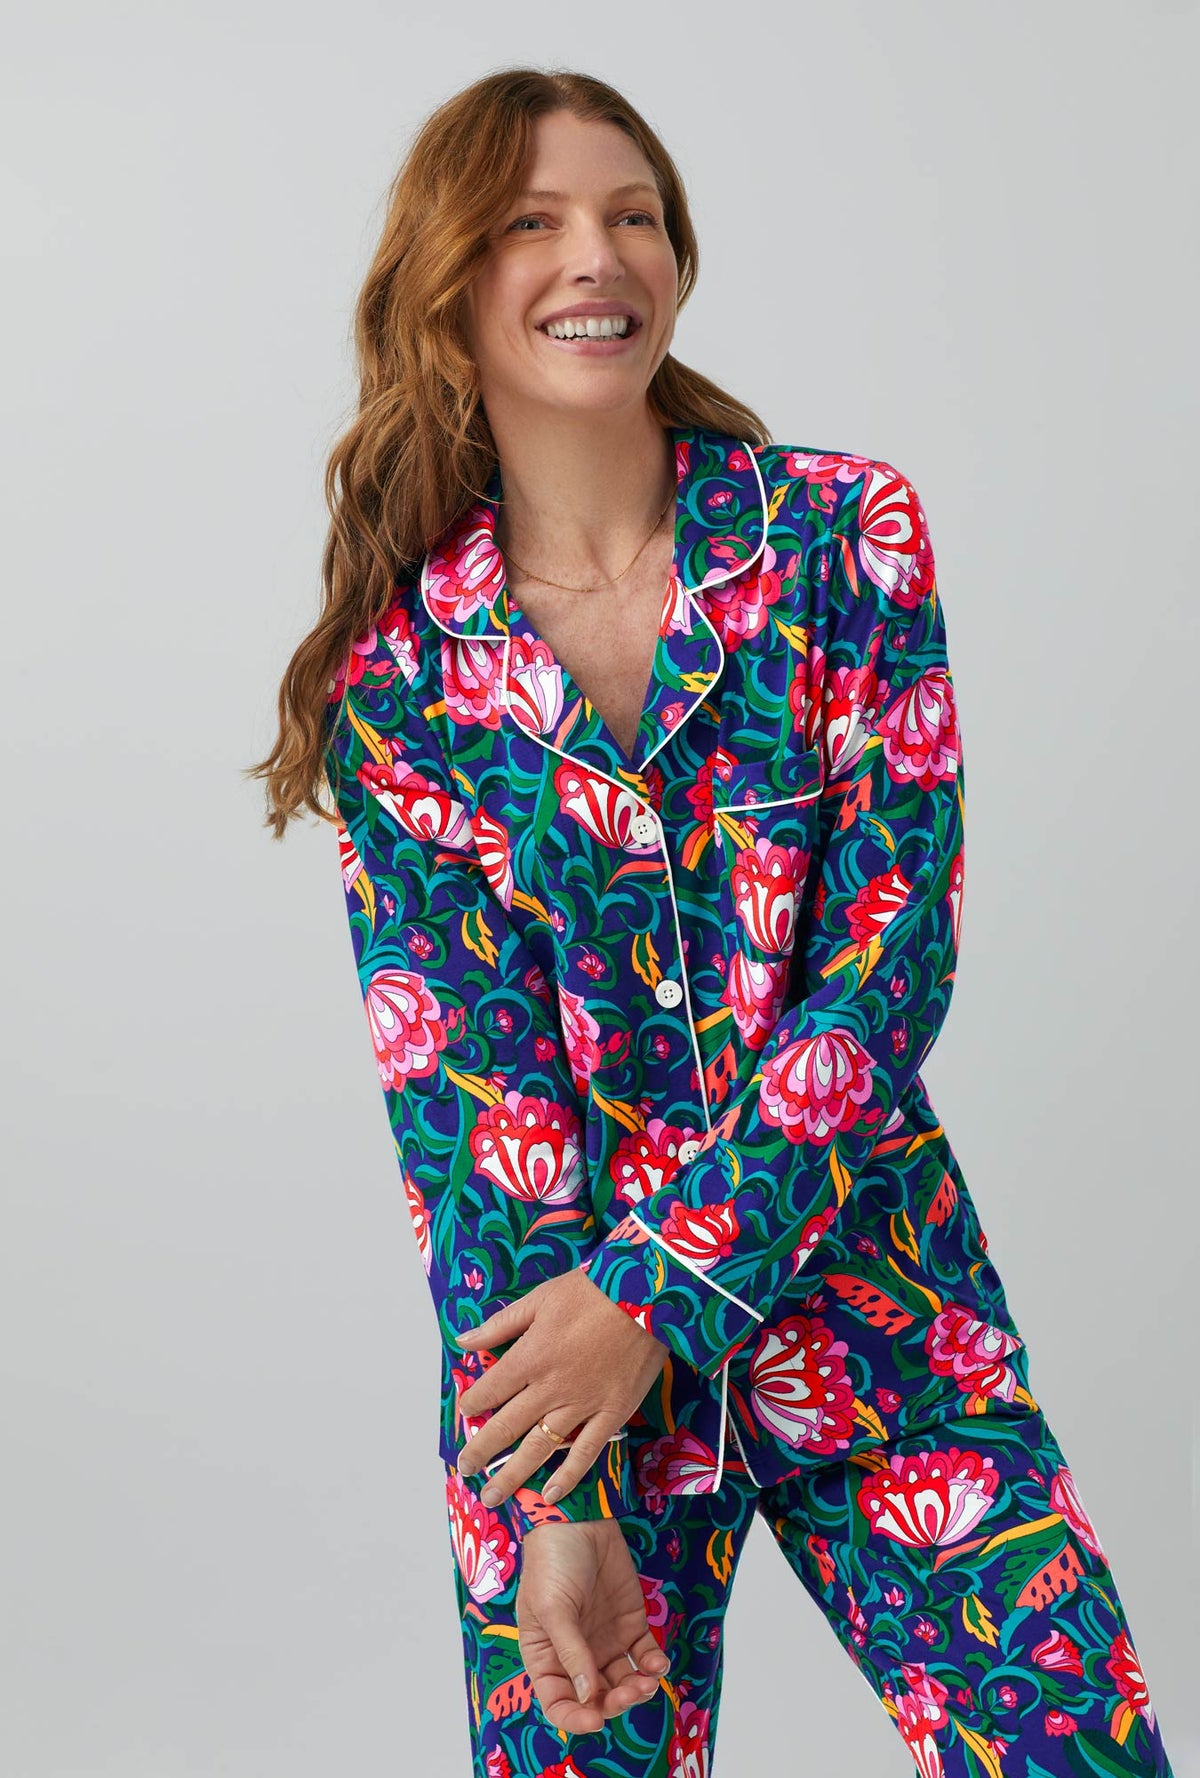 A lady wearing India Garden Long Sleeve Classic Stretch Jersey PJ Set